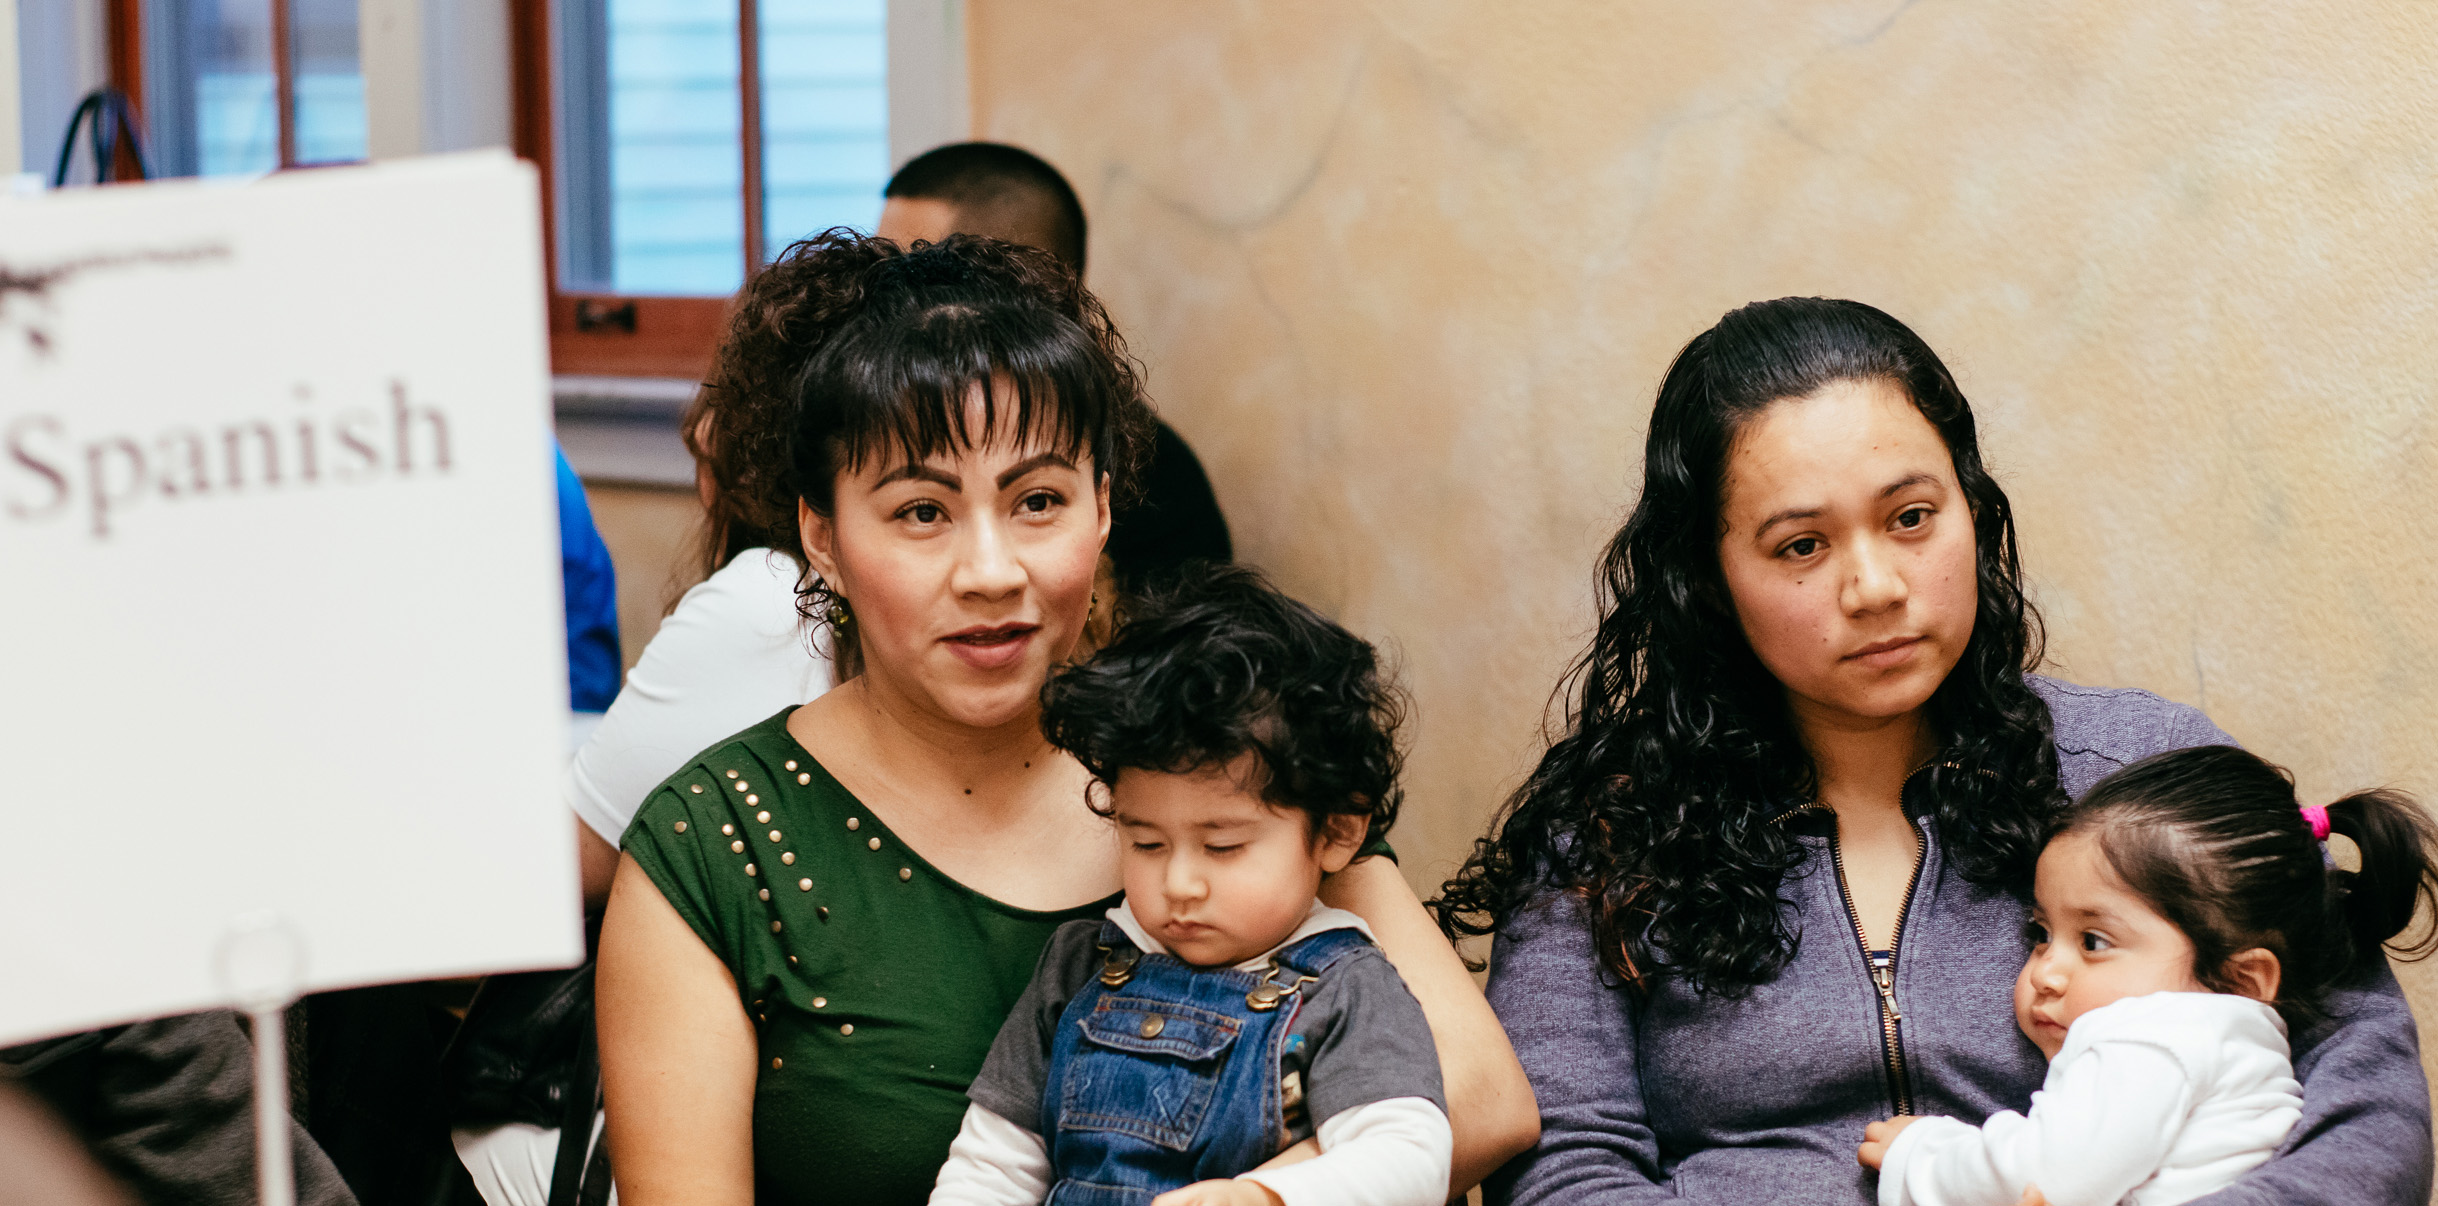 Two Seattle Latina women, each holding a baby, appear to be talking to someone next to a sign that reads: "Spanish".